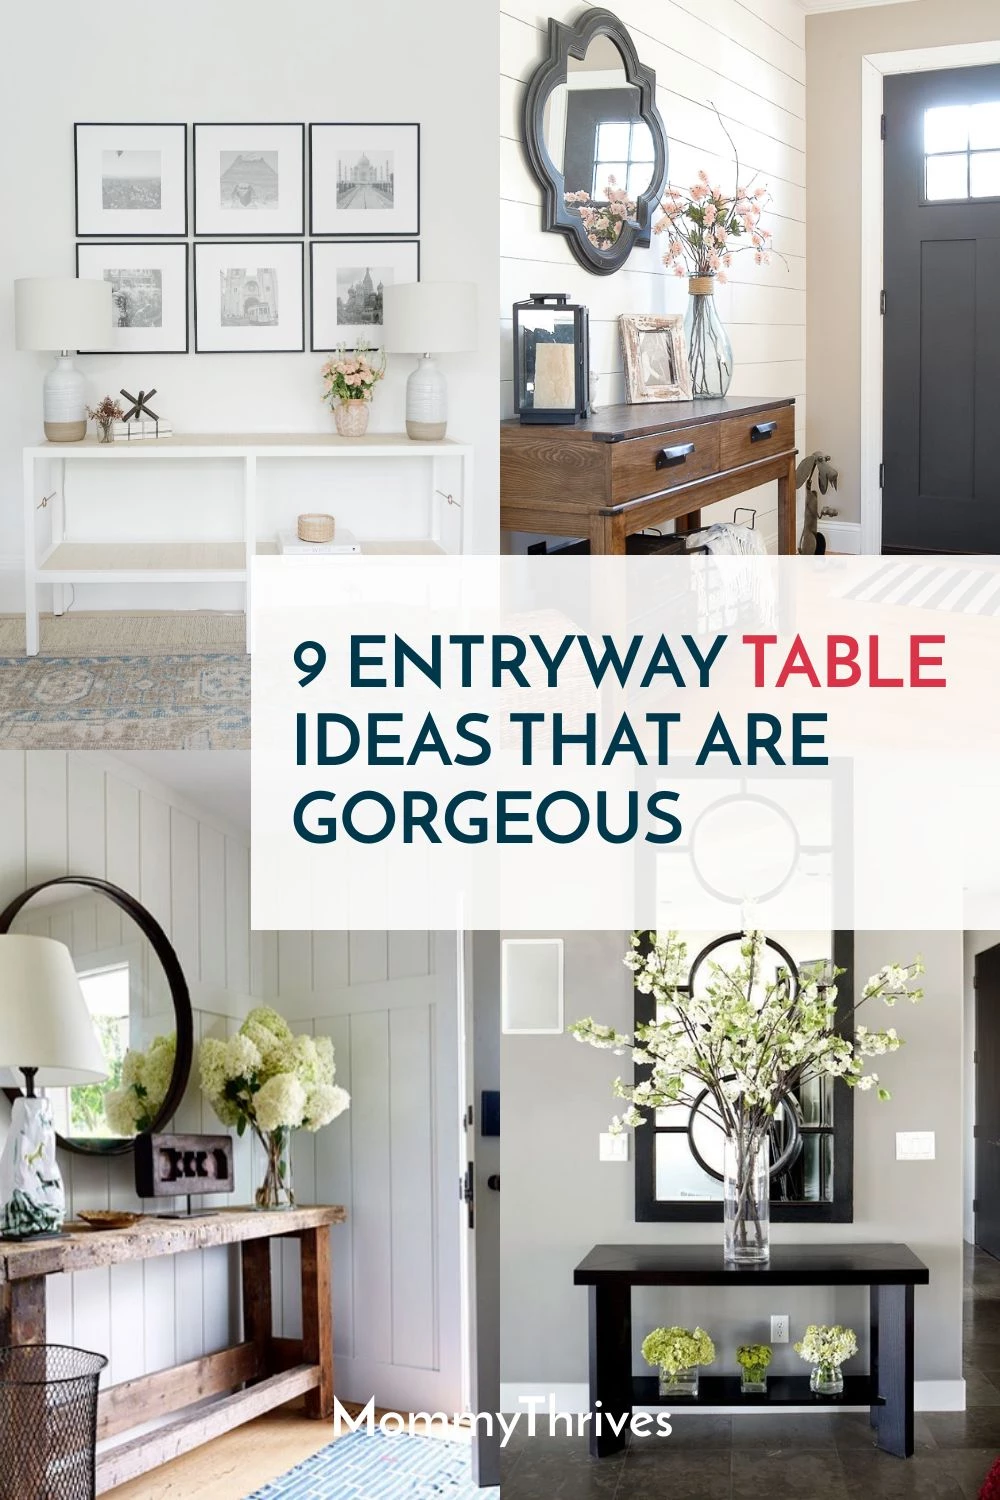 How to choose (and style) entryway furniture for your space